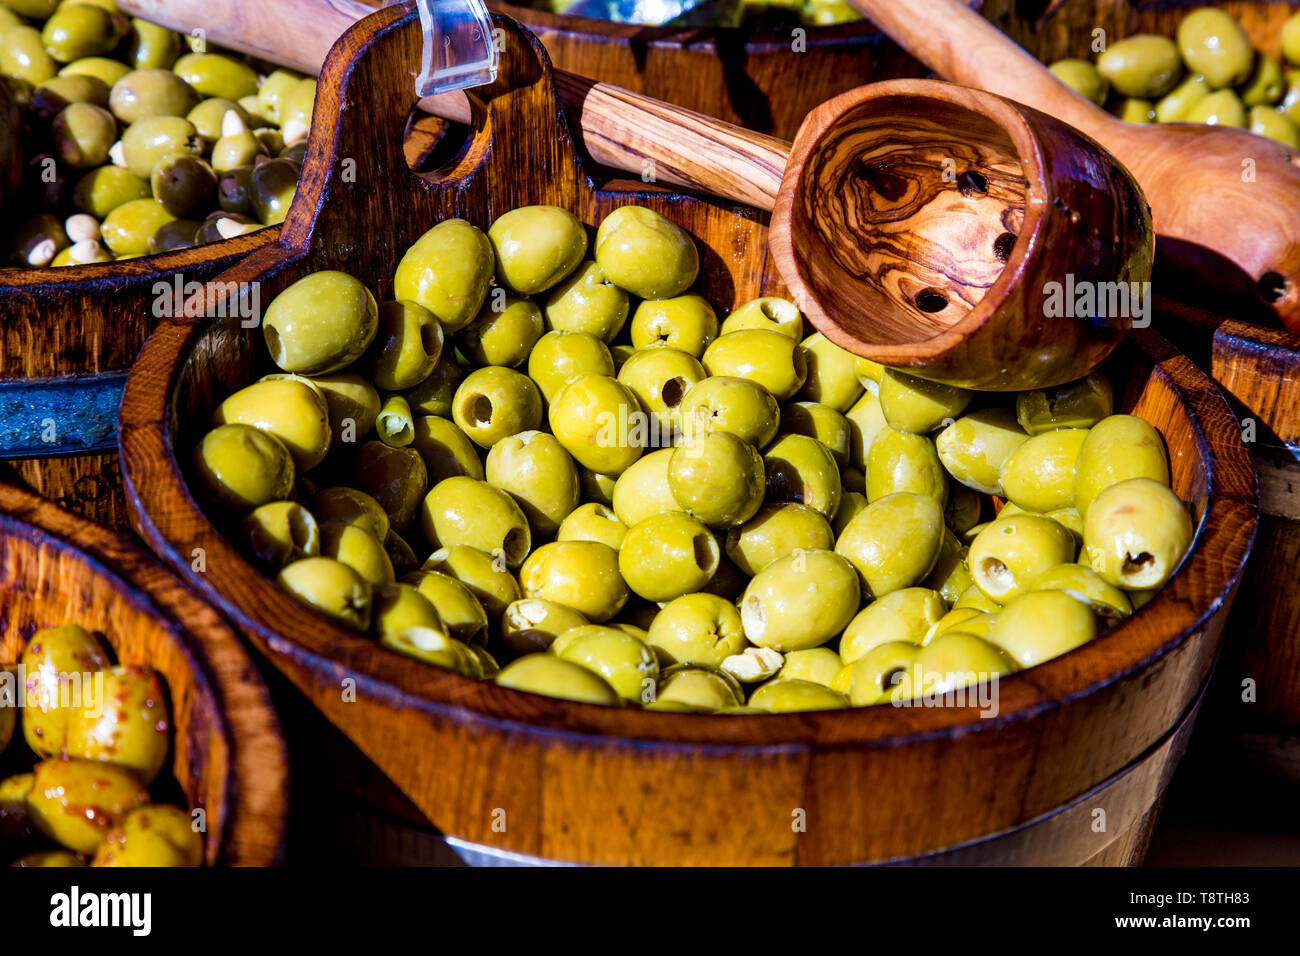 Fresh green olives in a wooden bucket and ladle at a farmer's market (Victoria Park Market, London, UK) Stock Photo